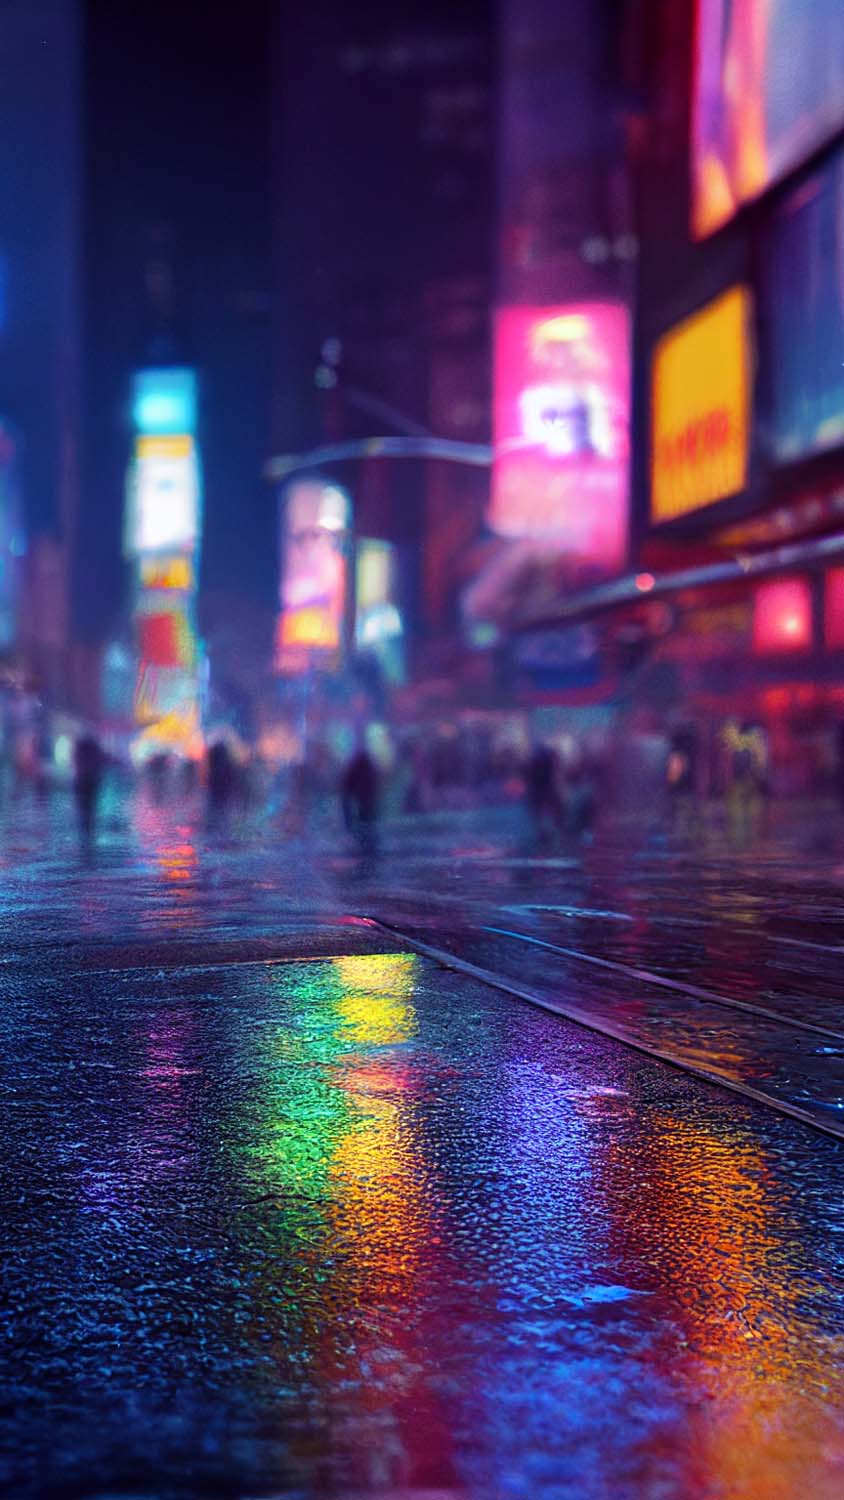 Times Square IPhone Wallpaper HD IPhone Wallpapers